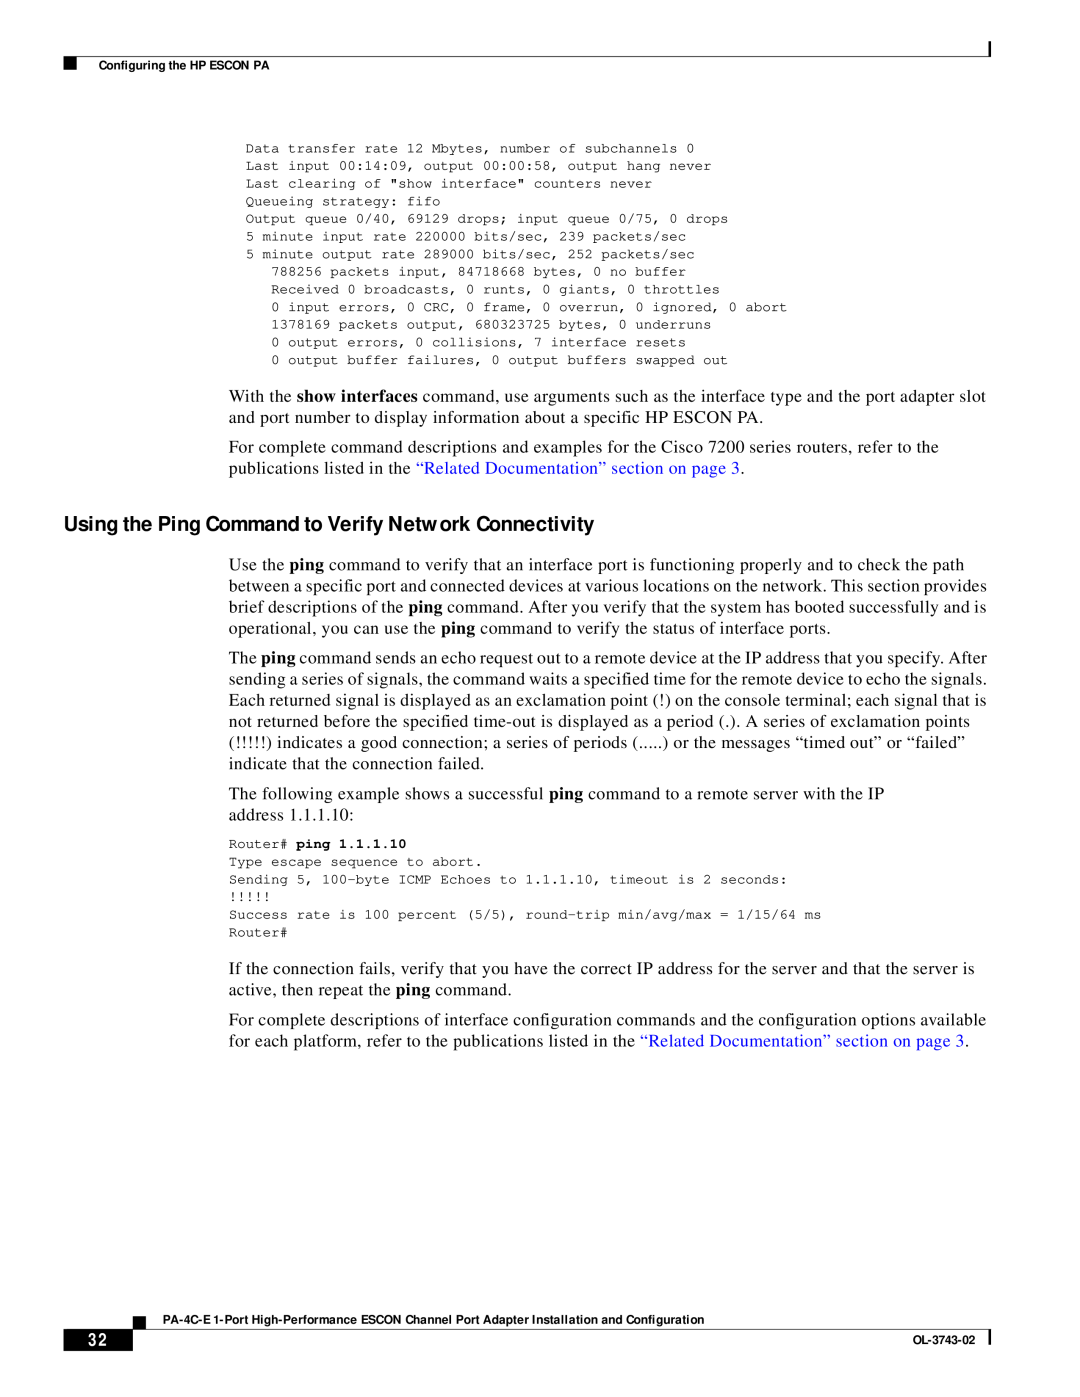 Cisco Systems PA-4C-E 1 manual Using the Ping Command to Verify Network Connectivity 